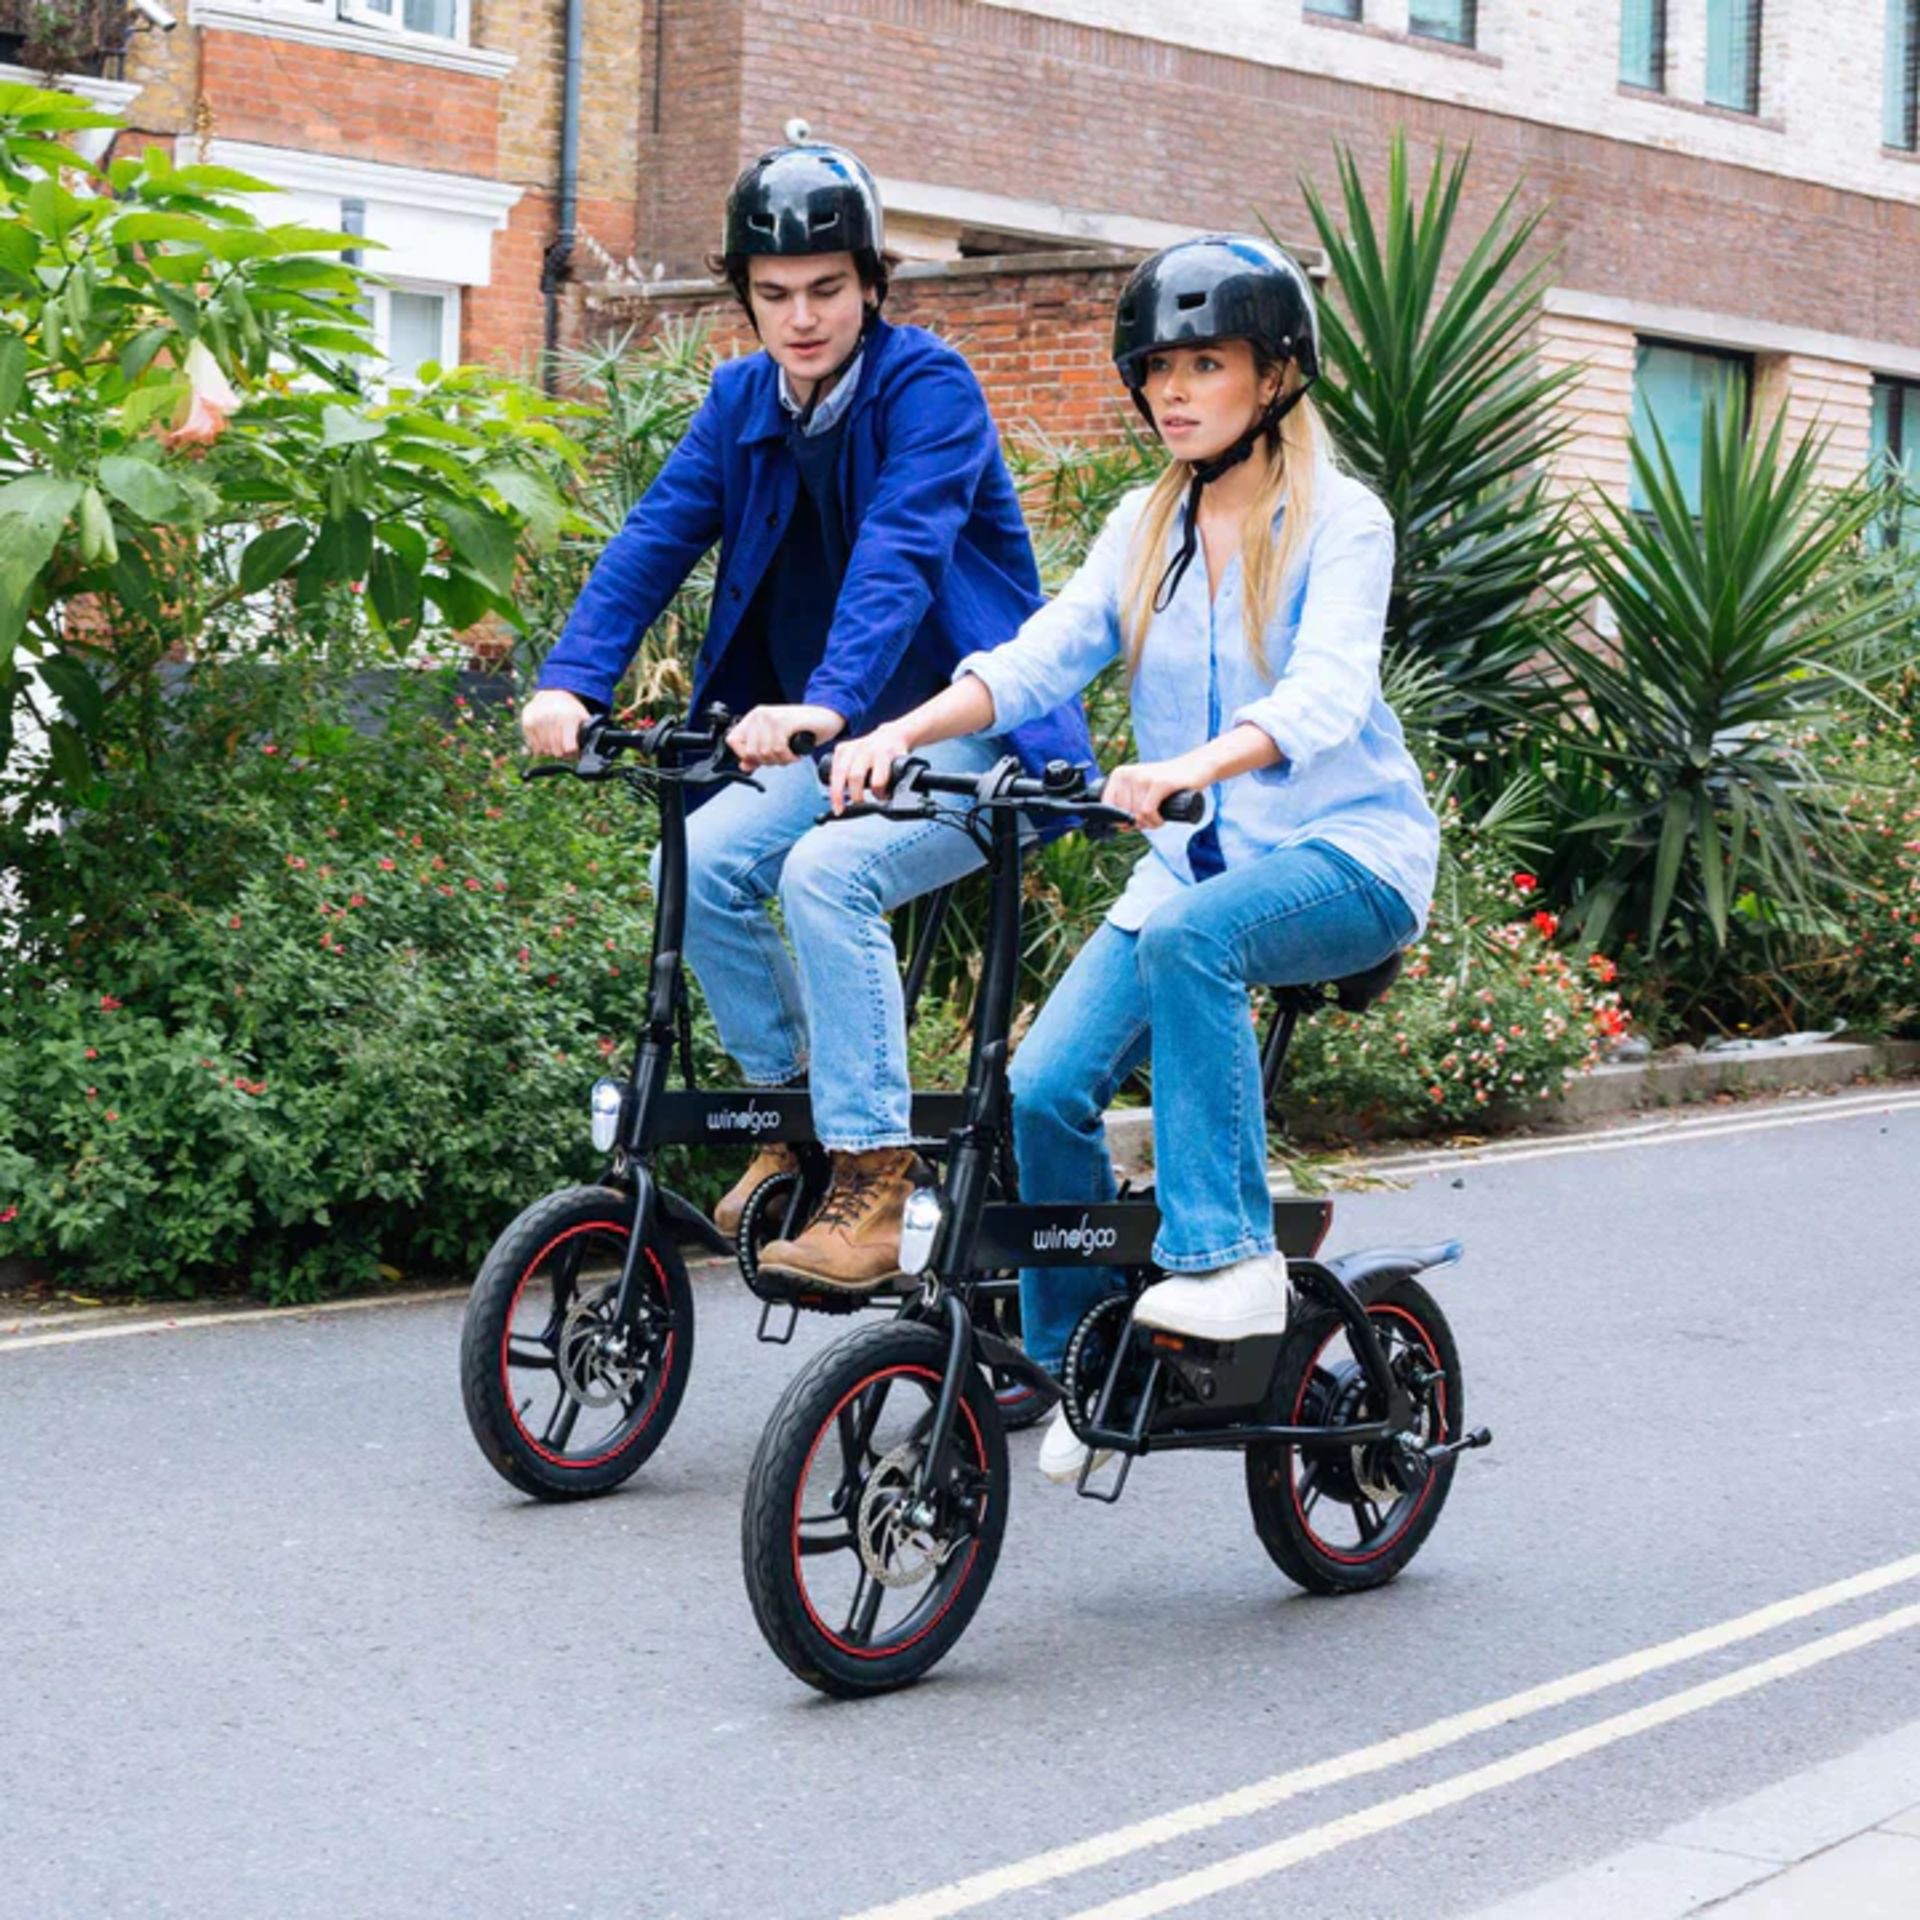 5 X Windgoo B20 Pro Electric Bike. RRP £1,100.99. With 16-inch-wide tires and a frame of upgraded - Bild 4 aus 7